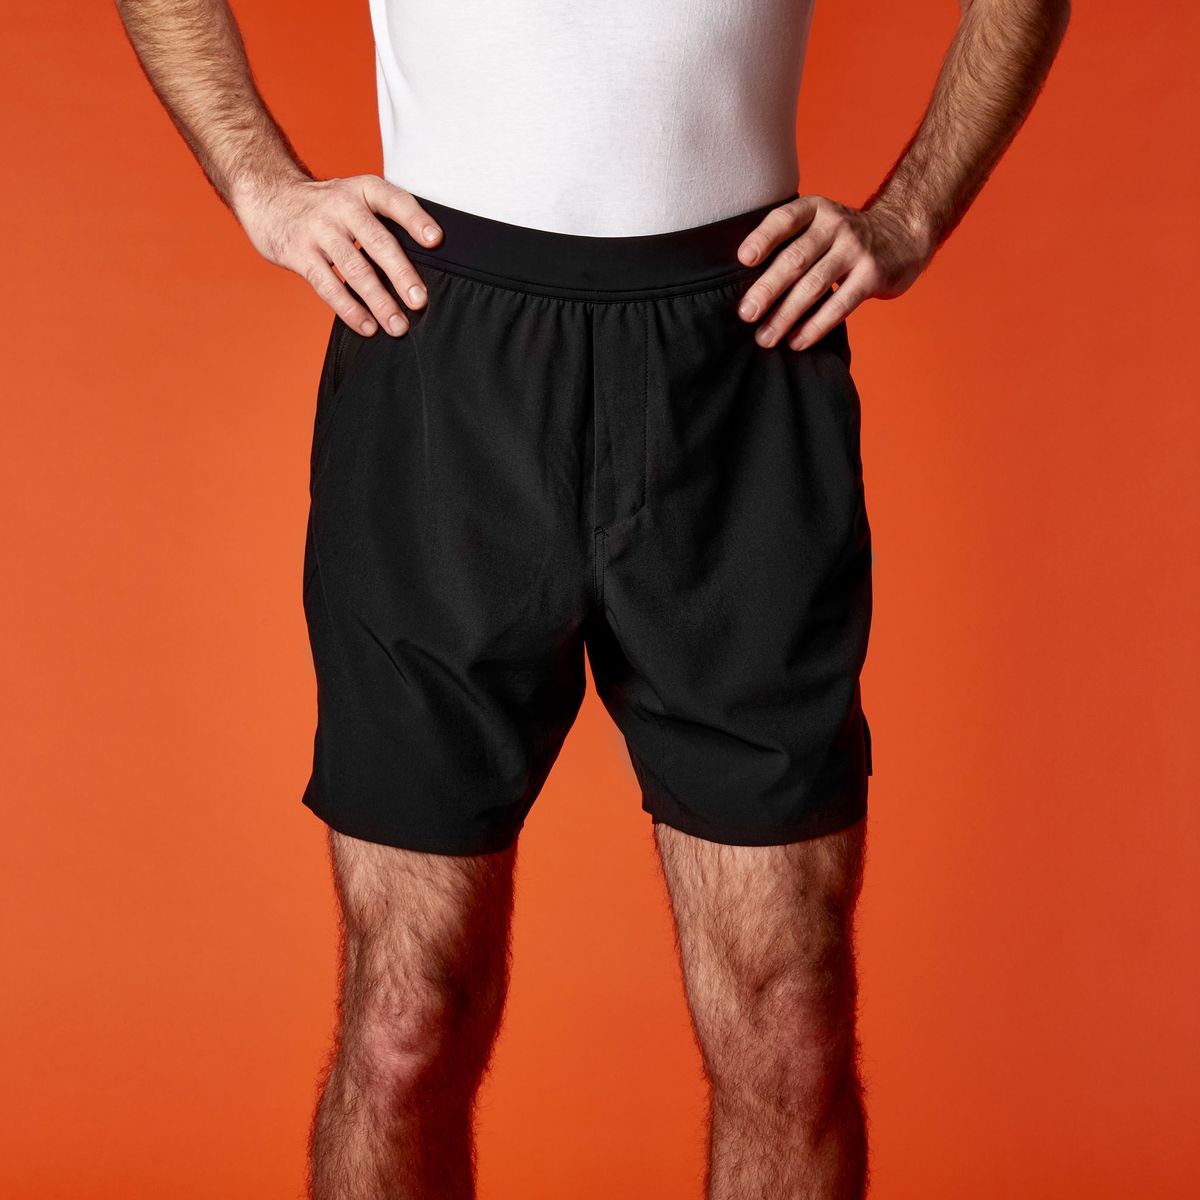 How Mens Shorts Should Fit  Shorts Length Guide